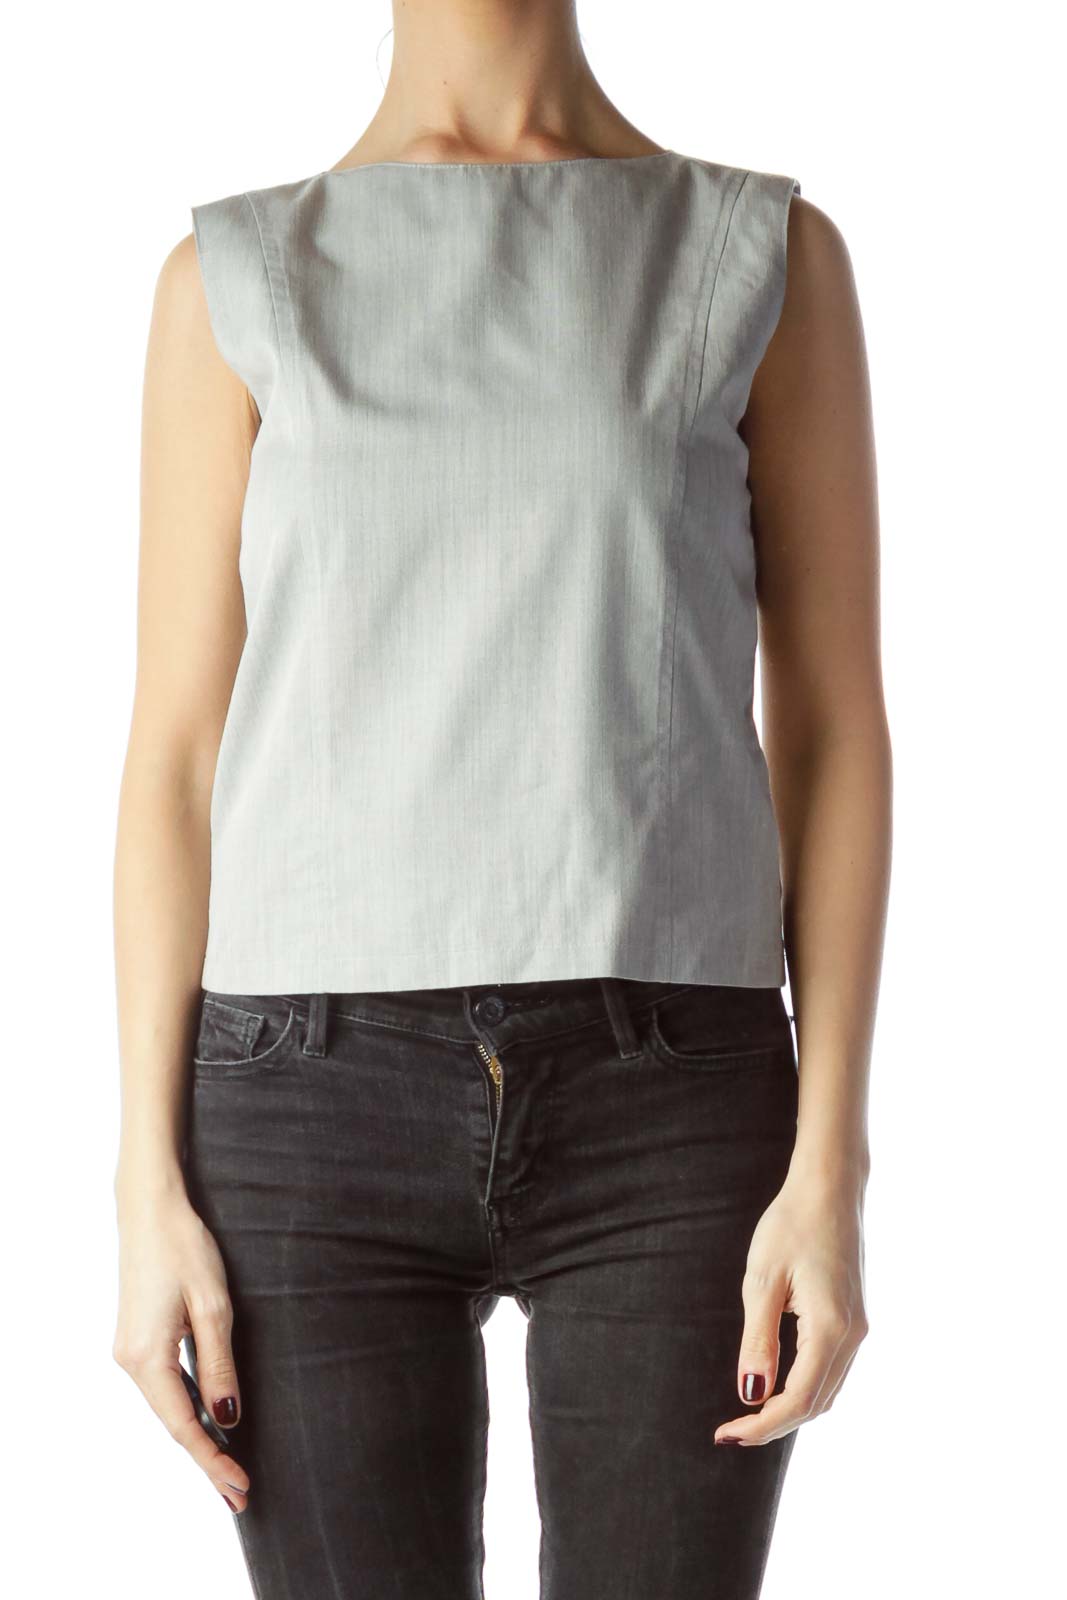 Gray Zippered Tank Top Blouse Front